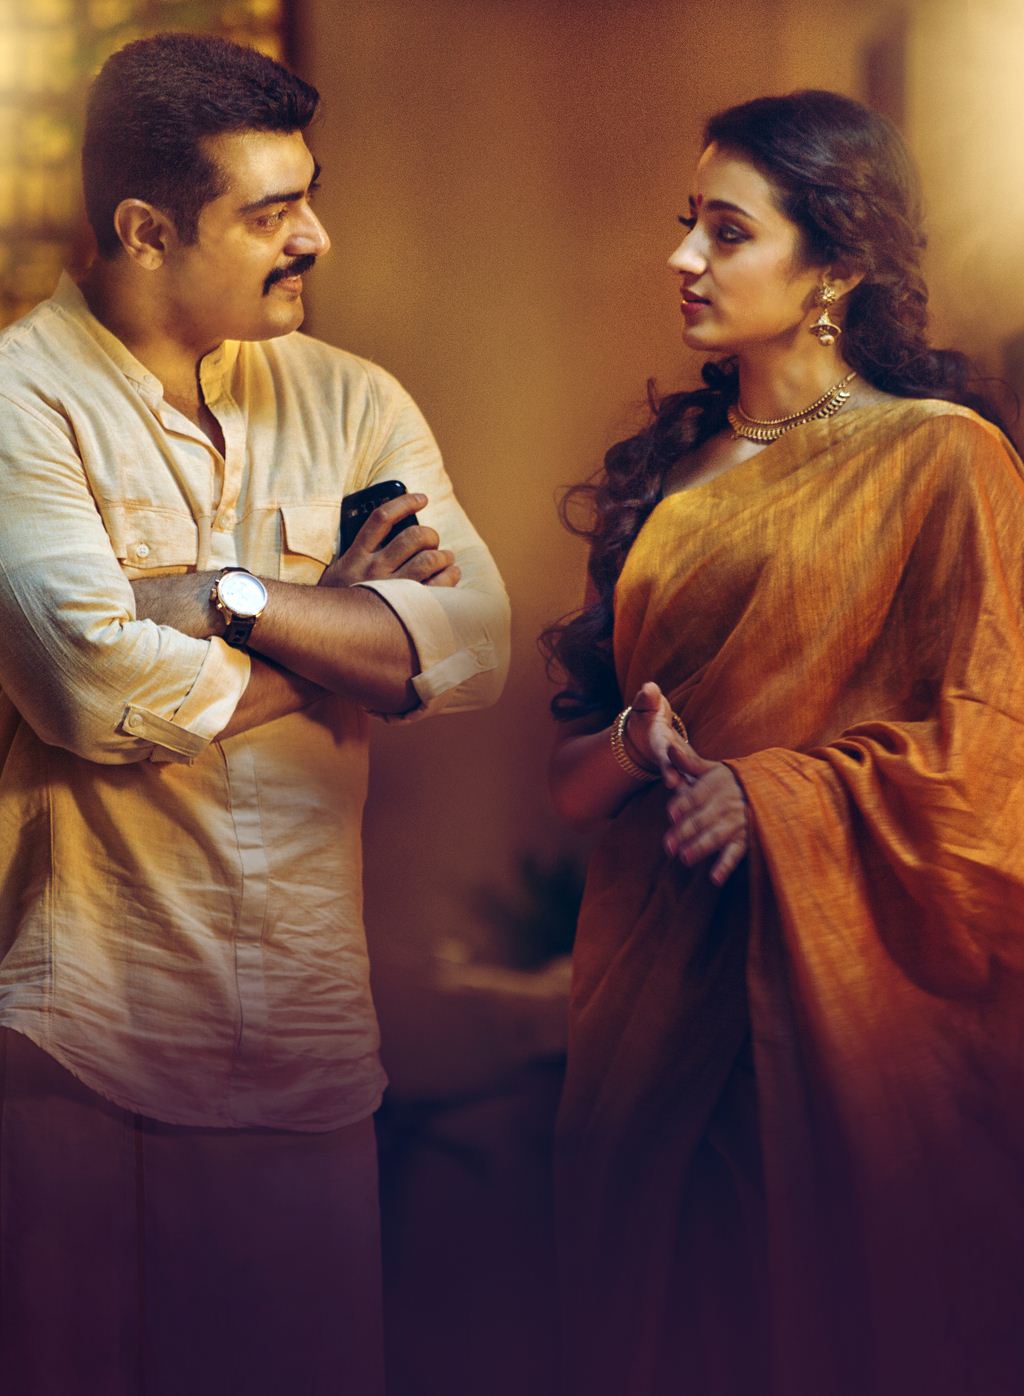 Yennai Arindhaal – Movie Review (Tamil) | From a cluttered desk